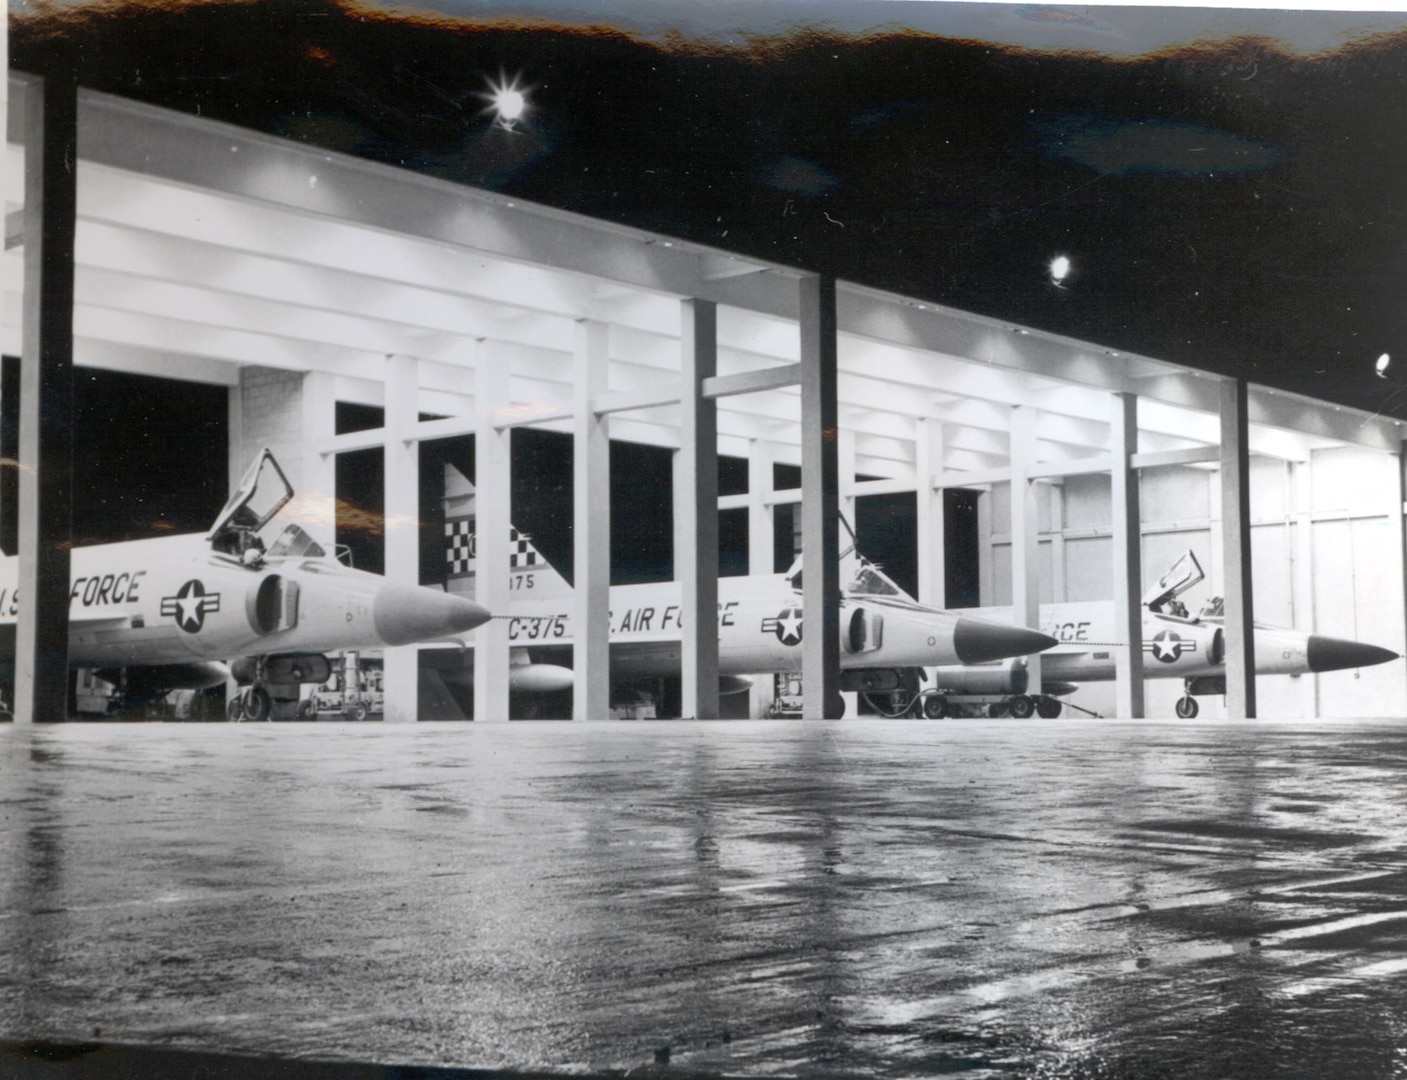 Pictured are F-102 Delta Daggers assigned to the 51 Fighter-Interceptor Wing parked at Naha AB, Okinawa, Japan circa 1966. The 16th Fighter Interceptor Squadron, as part of the 51st Fighter-Interceptor Group, deployed F-102s to Osan AB for first time on Dec. 7, 1959. The aircraft was part of the wing's arsenal in 1964 when the 16th Fighter Interceptor Squadron was deployed to Vietnam. (Courtesy photo)